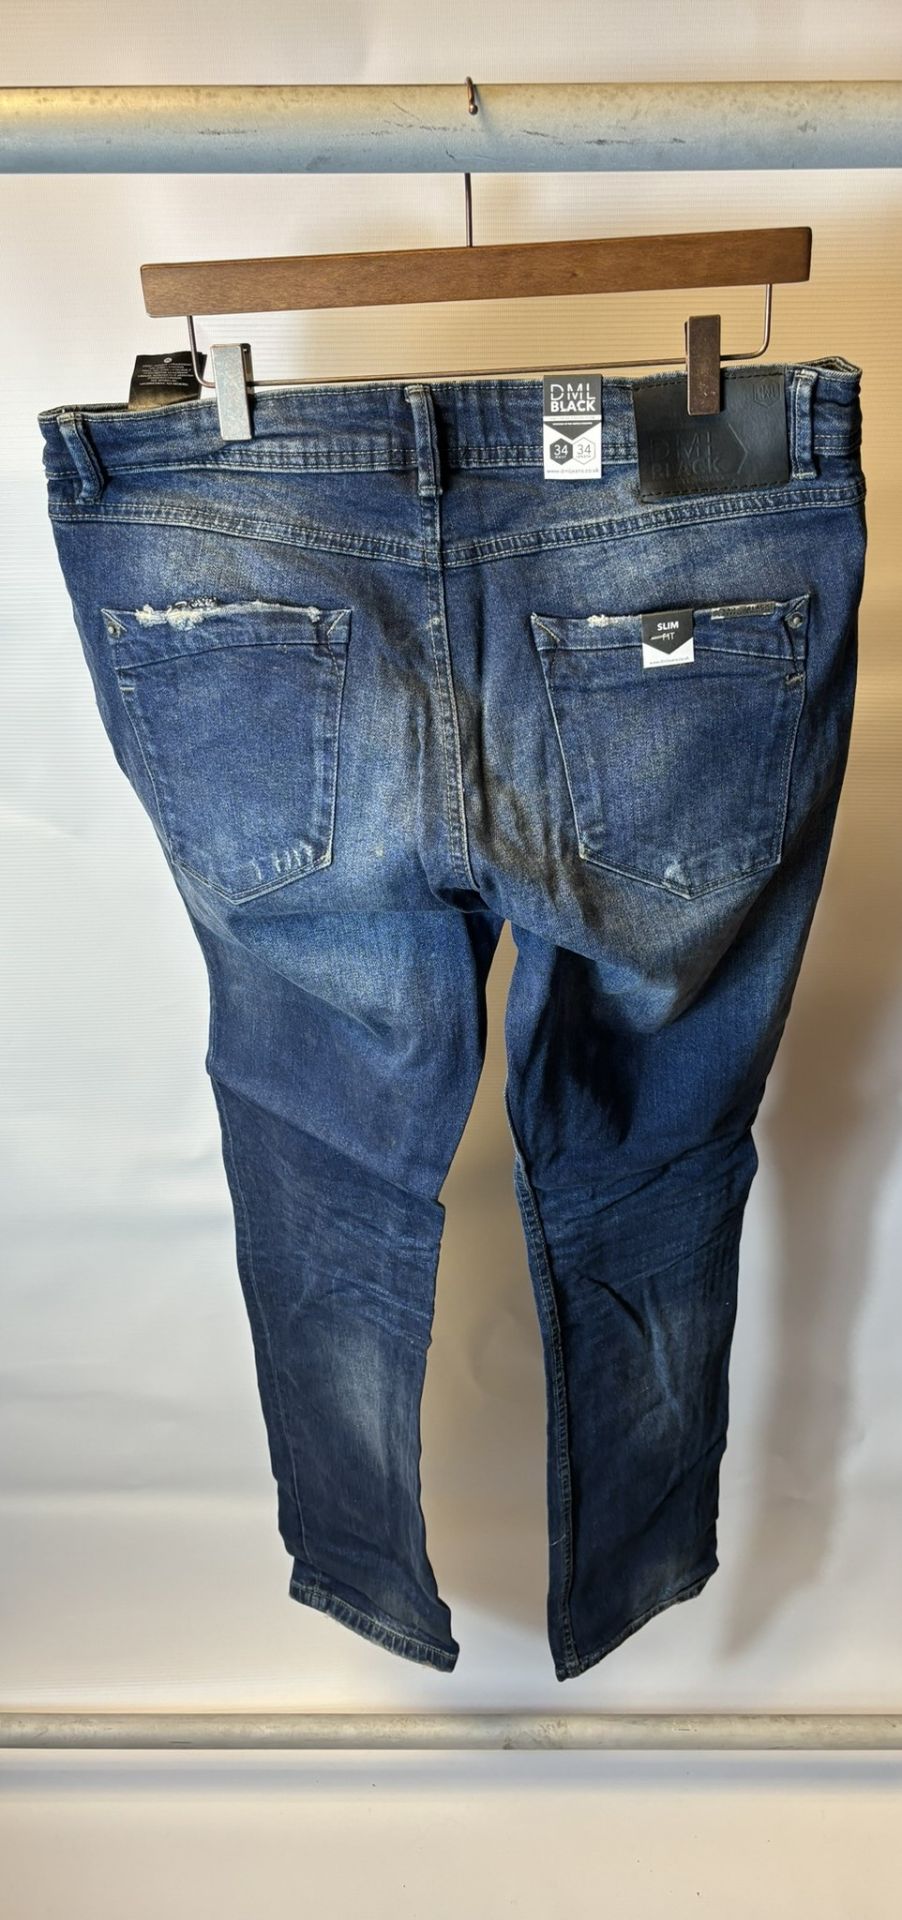 13 x Pairs Of various Sized DML Jeans Prophecy & Voyage Blue Jeans - Image 11 of 39